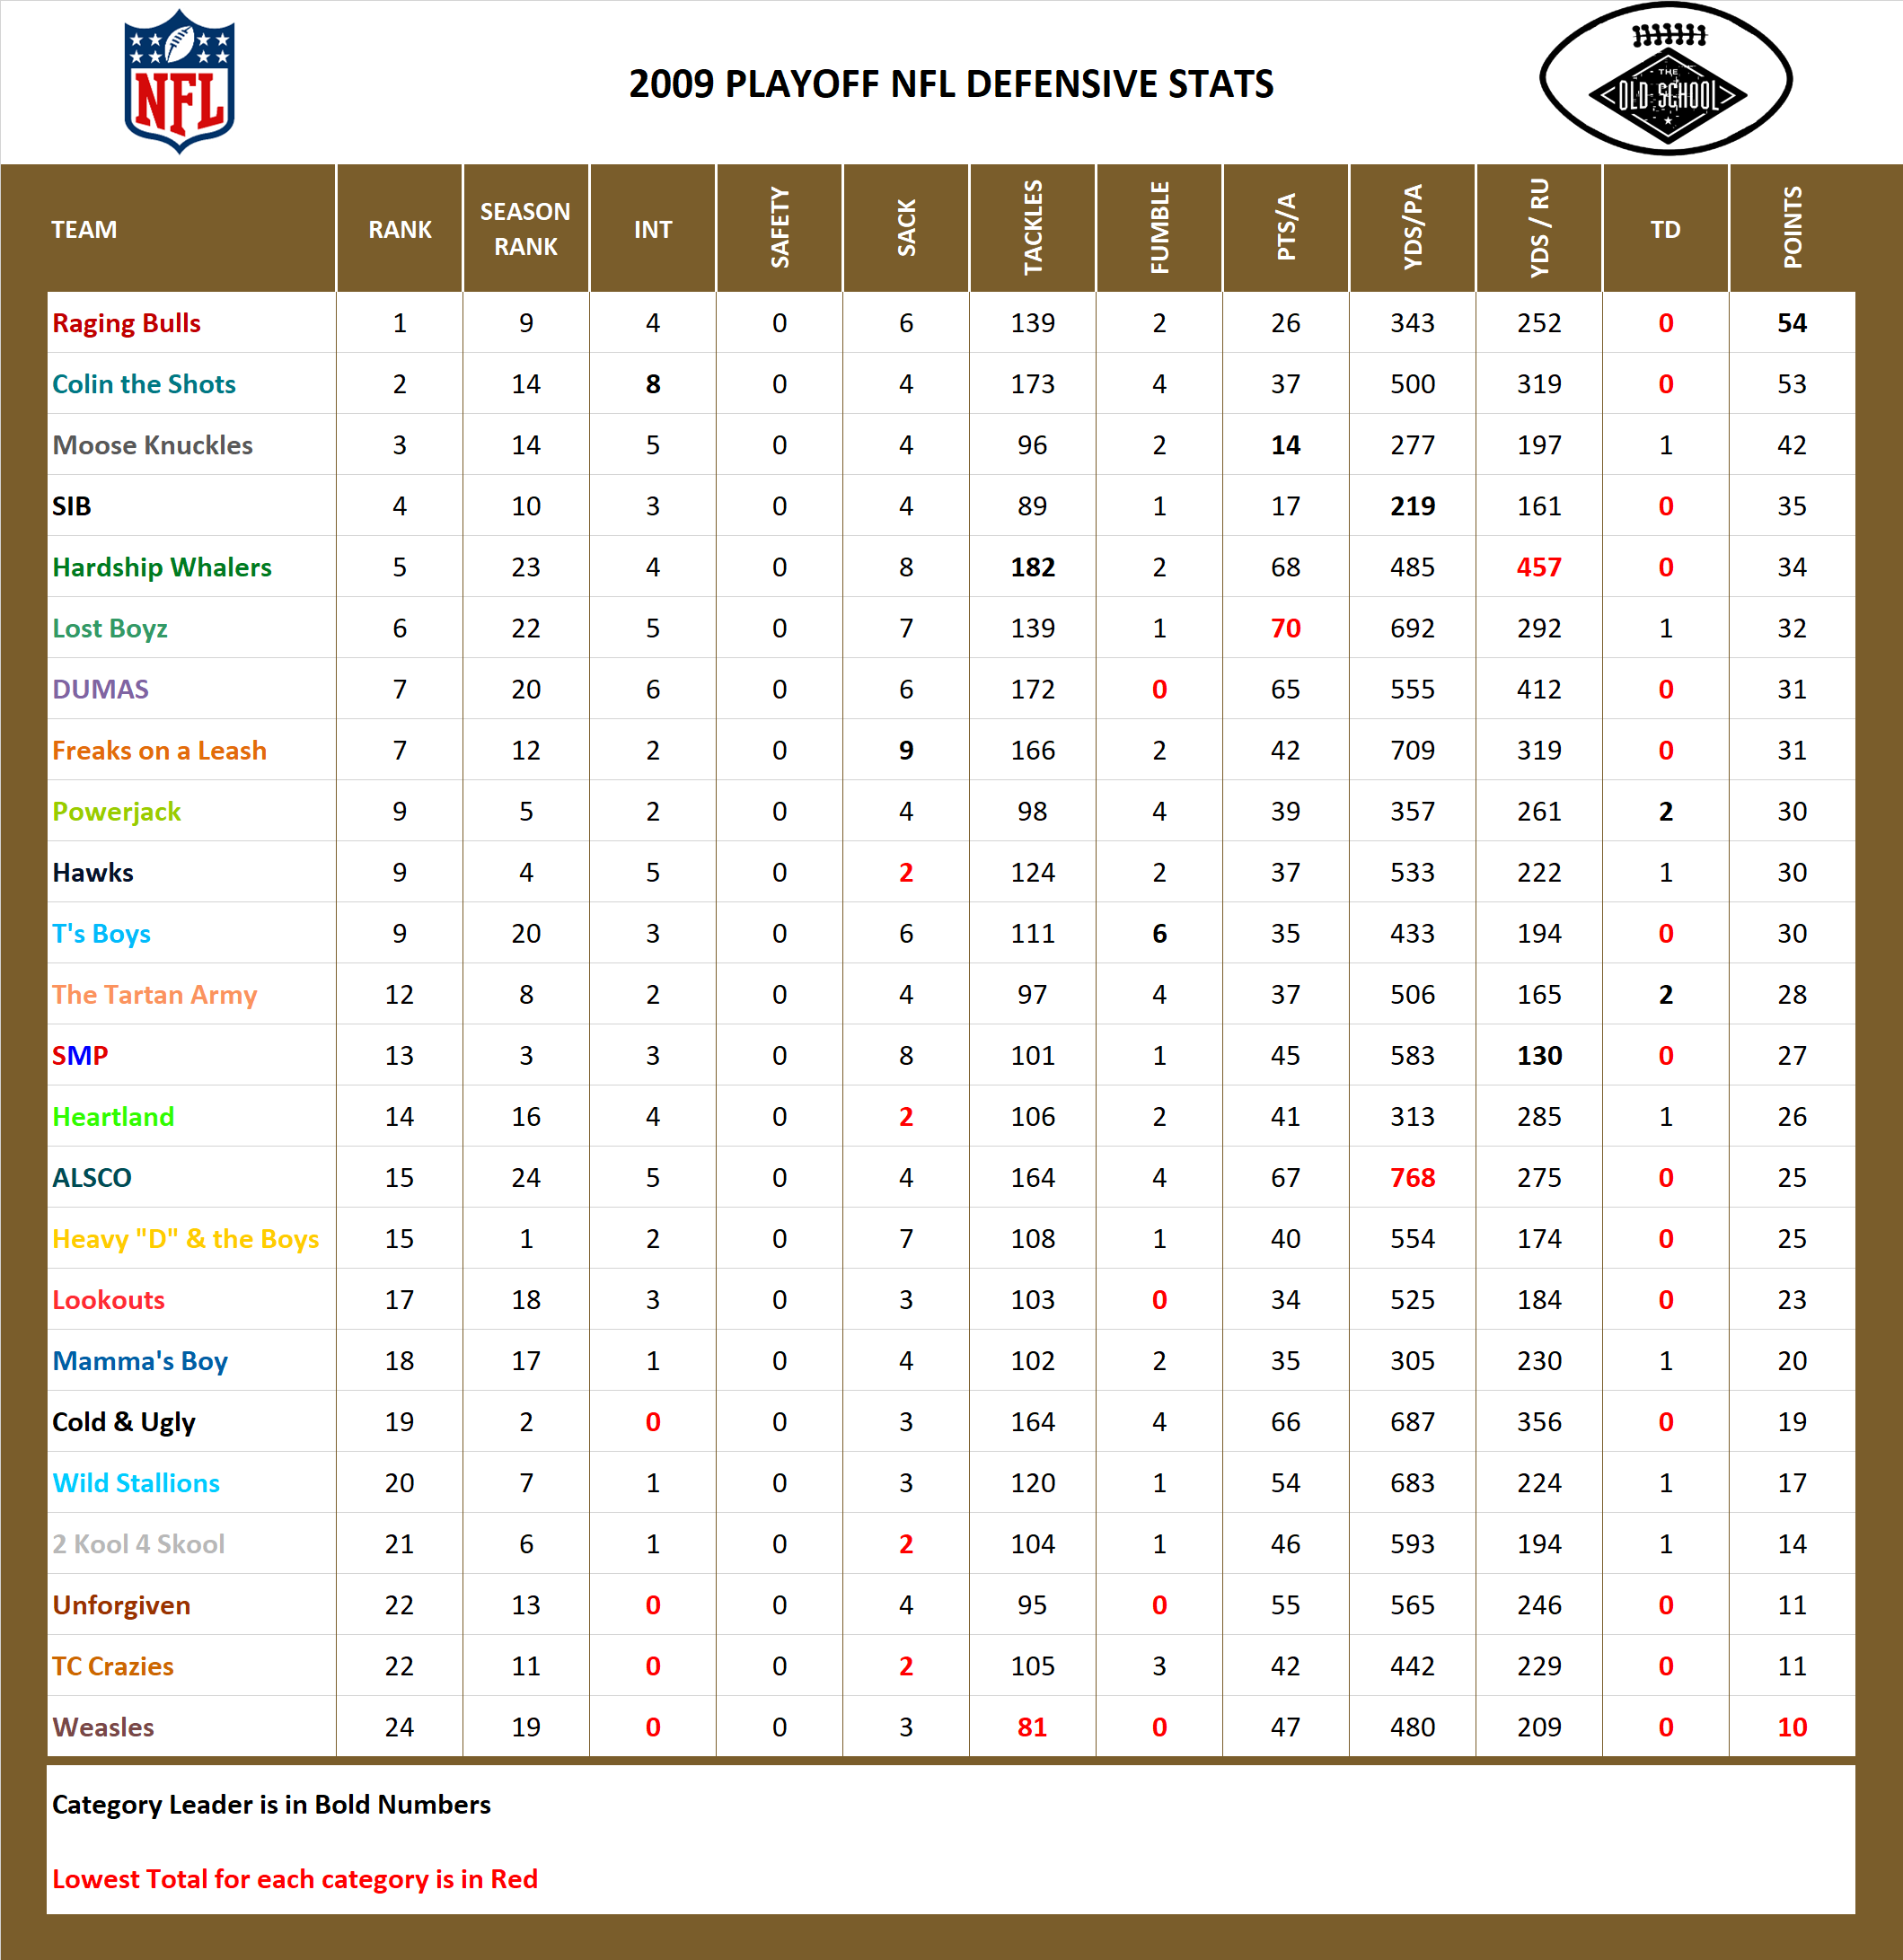 2009 National Football League Pool Playoff Defensive Stats